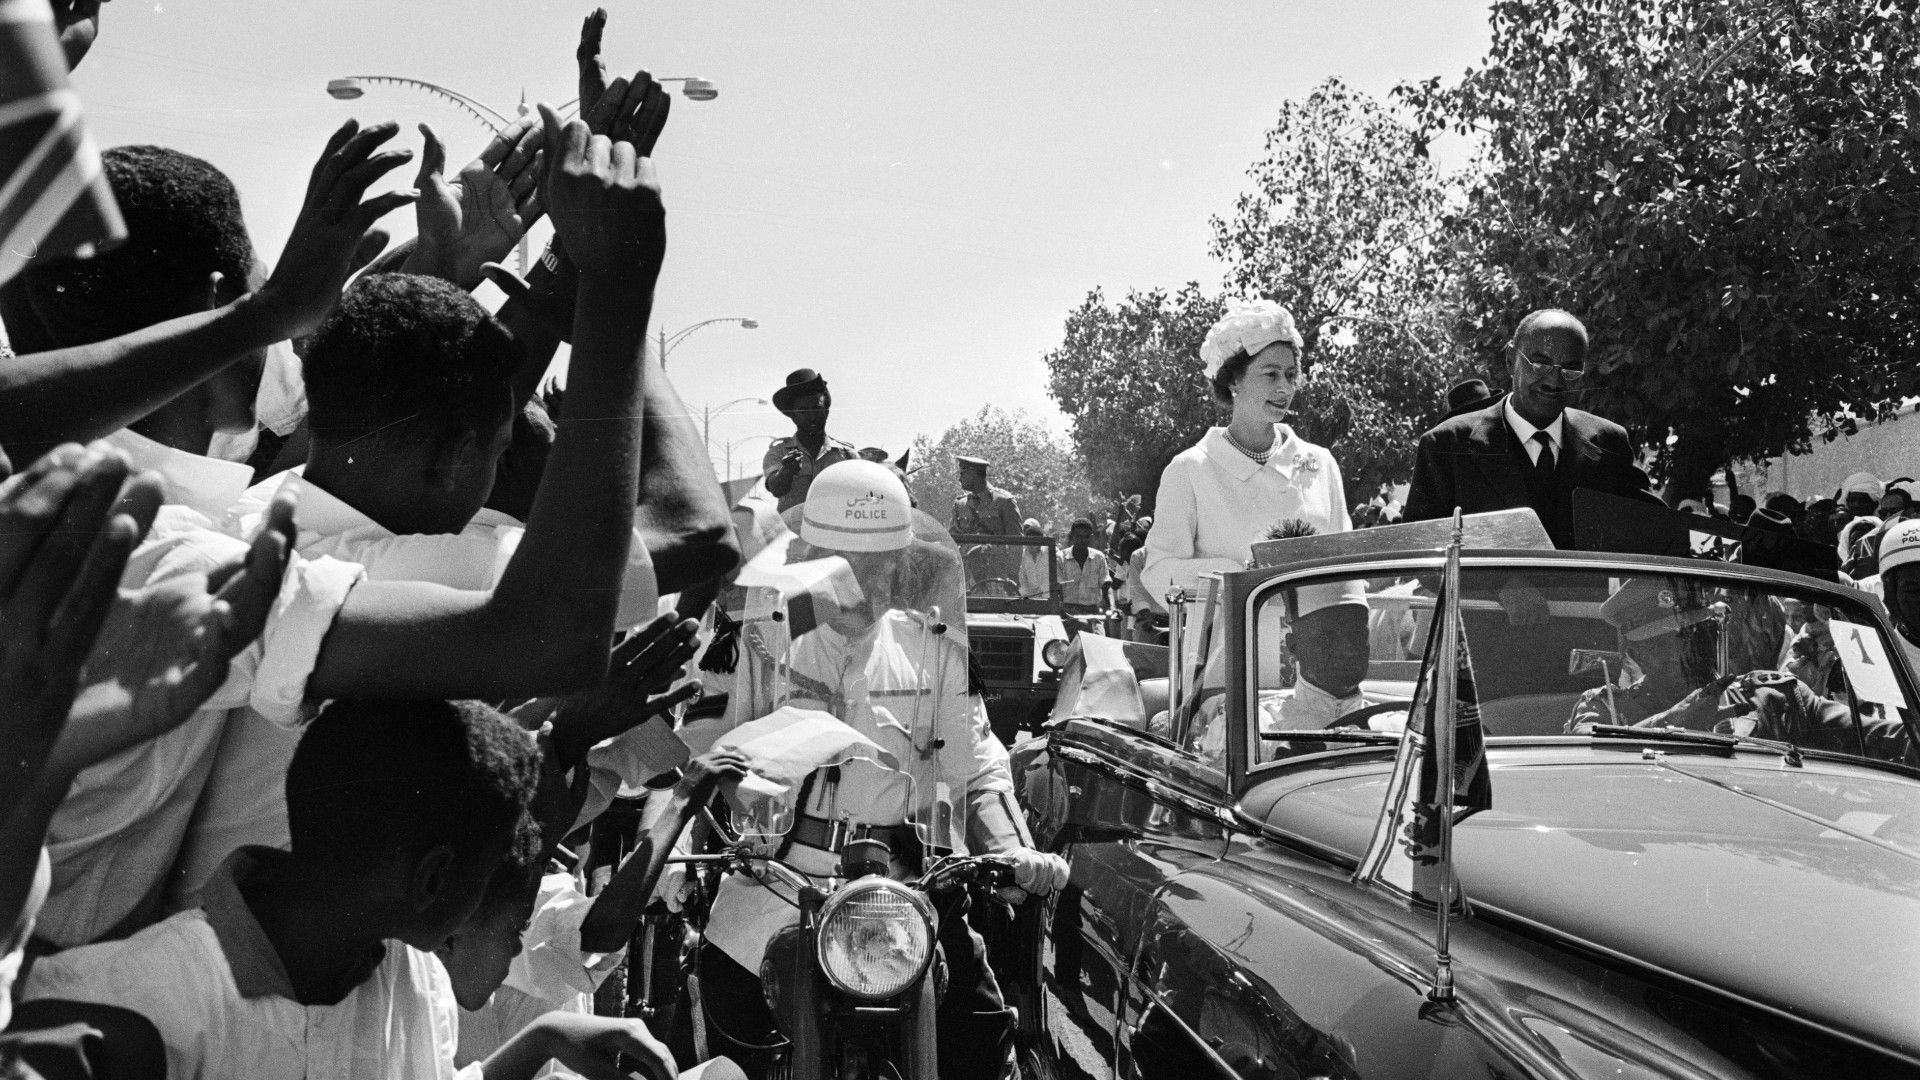 <p>                     During a time of significant political turmoil and unrest within the country, Queen Elizabeth took the time to pay an important visit to the Republic of the Sudan in February 1965.                   </p>                                      <p>                     It was a significant move due to the unrest there at the time, which many thought might make it dangerous for the UK monarch. However, it appears the Queen gladly spent a few days there and was greeted with a warm welcome, with crowds of onlookers lining the streets to say hello.                   </p>                                      <p>                     She spent part of her time on state duties whilst there, whilst also squeezing in the chance to explore some of her interests during the trip. For example, she spent her first day at the Khartoum racecourse, before then visiting the construction of the Roseires dam. She also visited the Gezira irrigation project in Medani, which had been set up by the British government some decades earlier.                   </p>